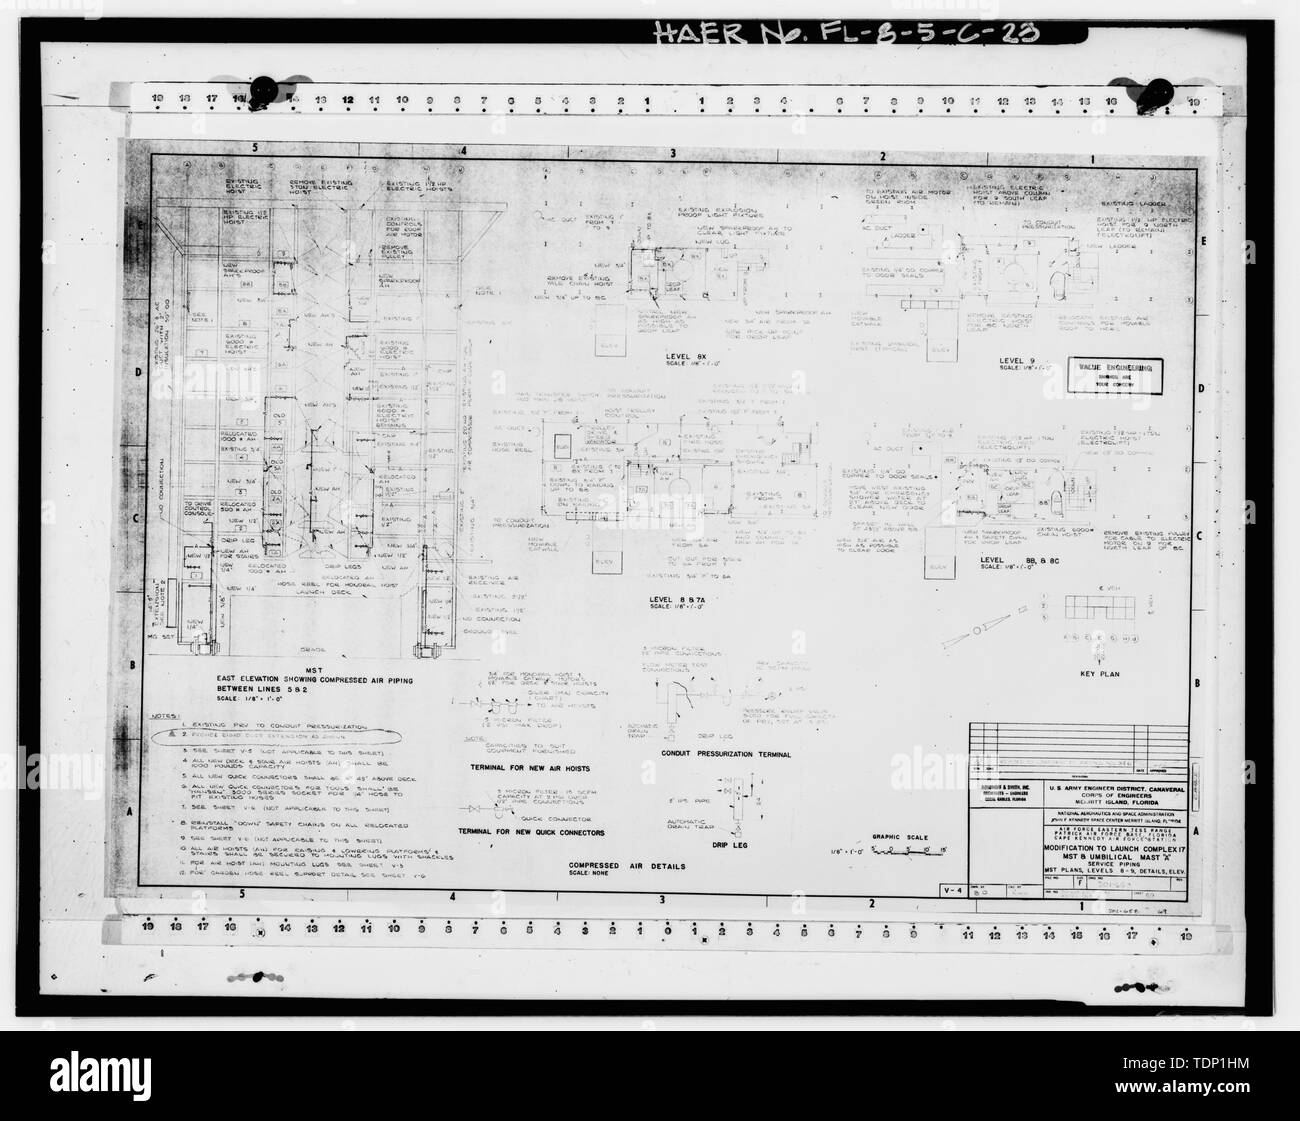 Photocopy of engineering drawing. MODIFICATION TO LAUNCH COMPLEX 17 MST AND UMBILICAL MAST 'A'- SERVICE PIPING, MST PLANS, LEVELS 8-9, DETAILS, ELEVATIONS, MARCH 1967. - Cape Canaveral Air Station, Launch Complex 17, Facility 28416, East end of Lighthouse Road, Cape Canaveral, Brevard County, FL Stock Photo